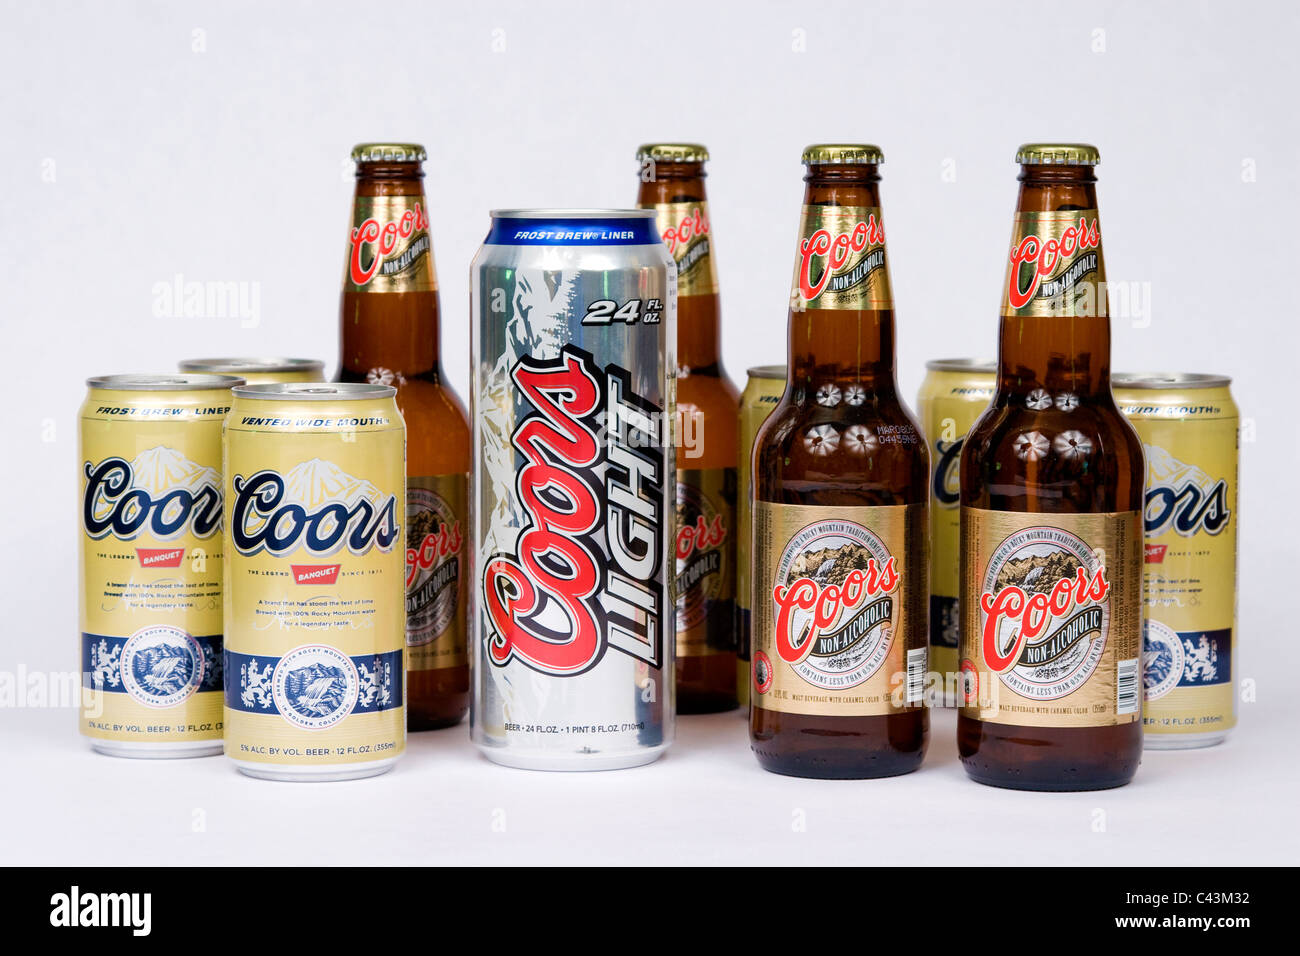 https://c8.alamy.com/comp/C43M32/coors-beer-and-coors-beer-light-bottles-and-cans-C43M32.jpg